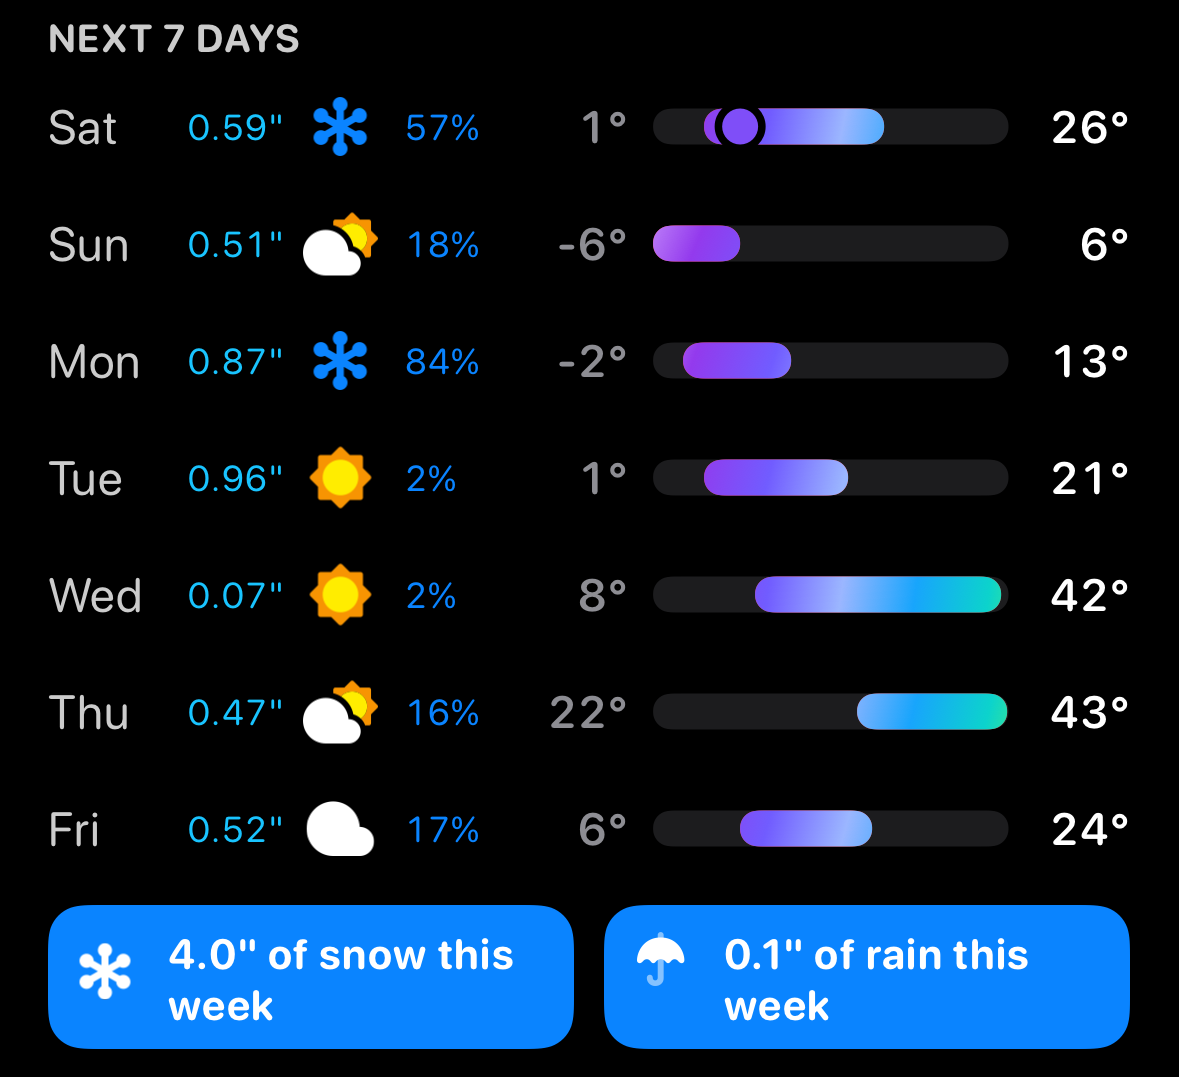 A weather forecast displays precipitation, chance of snow, and temperature ranges for the next seven days. Icons indicate sunny or snowy conditions. Text at bottom summarizes weekly snow and rain totals.